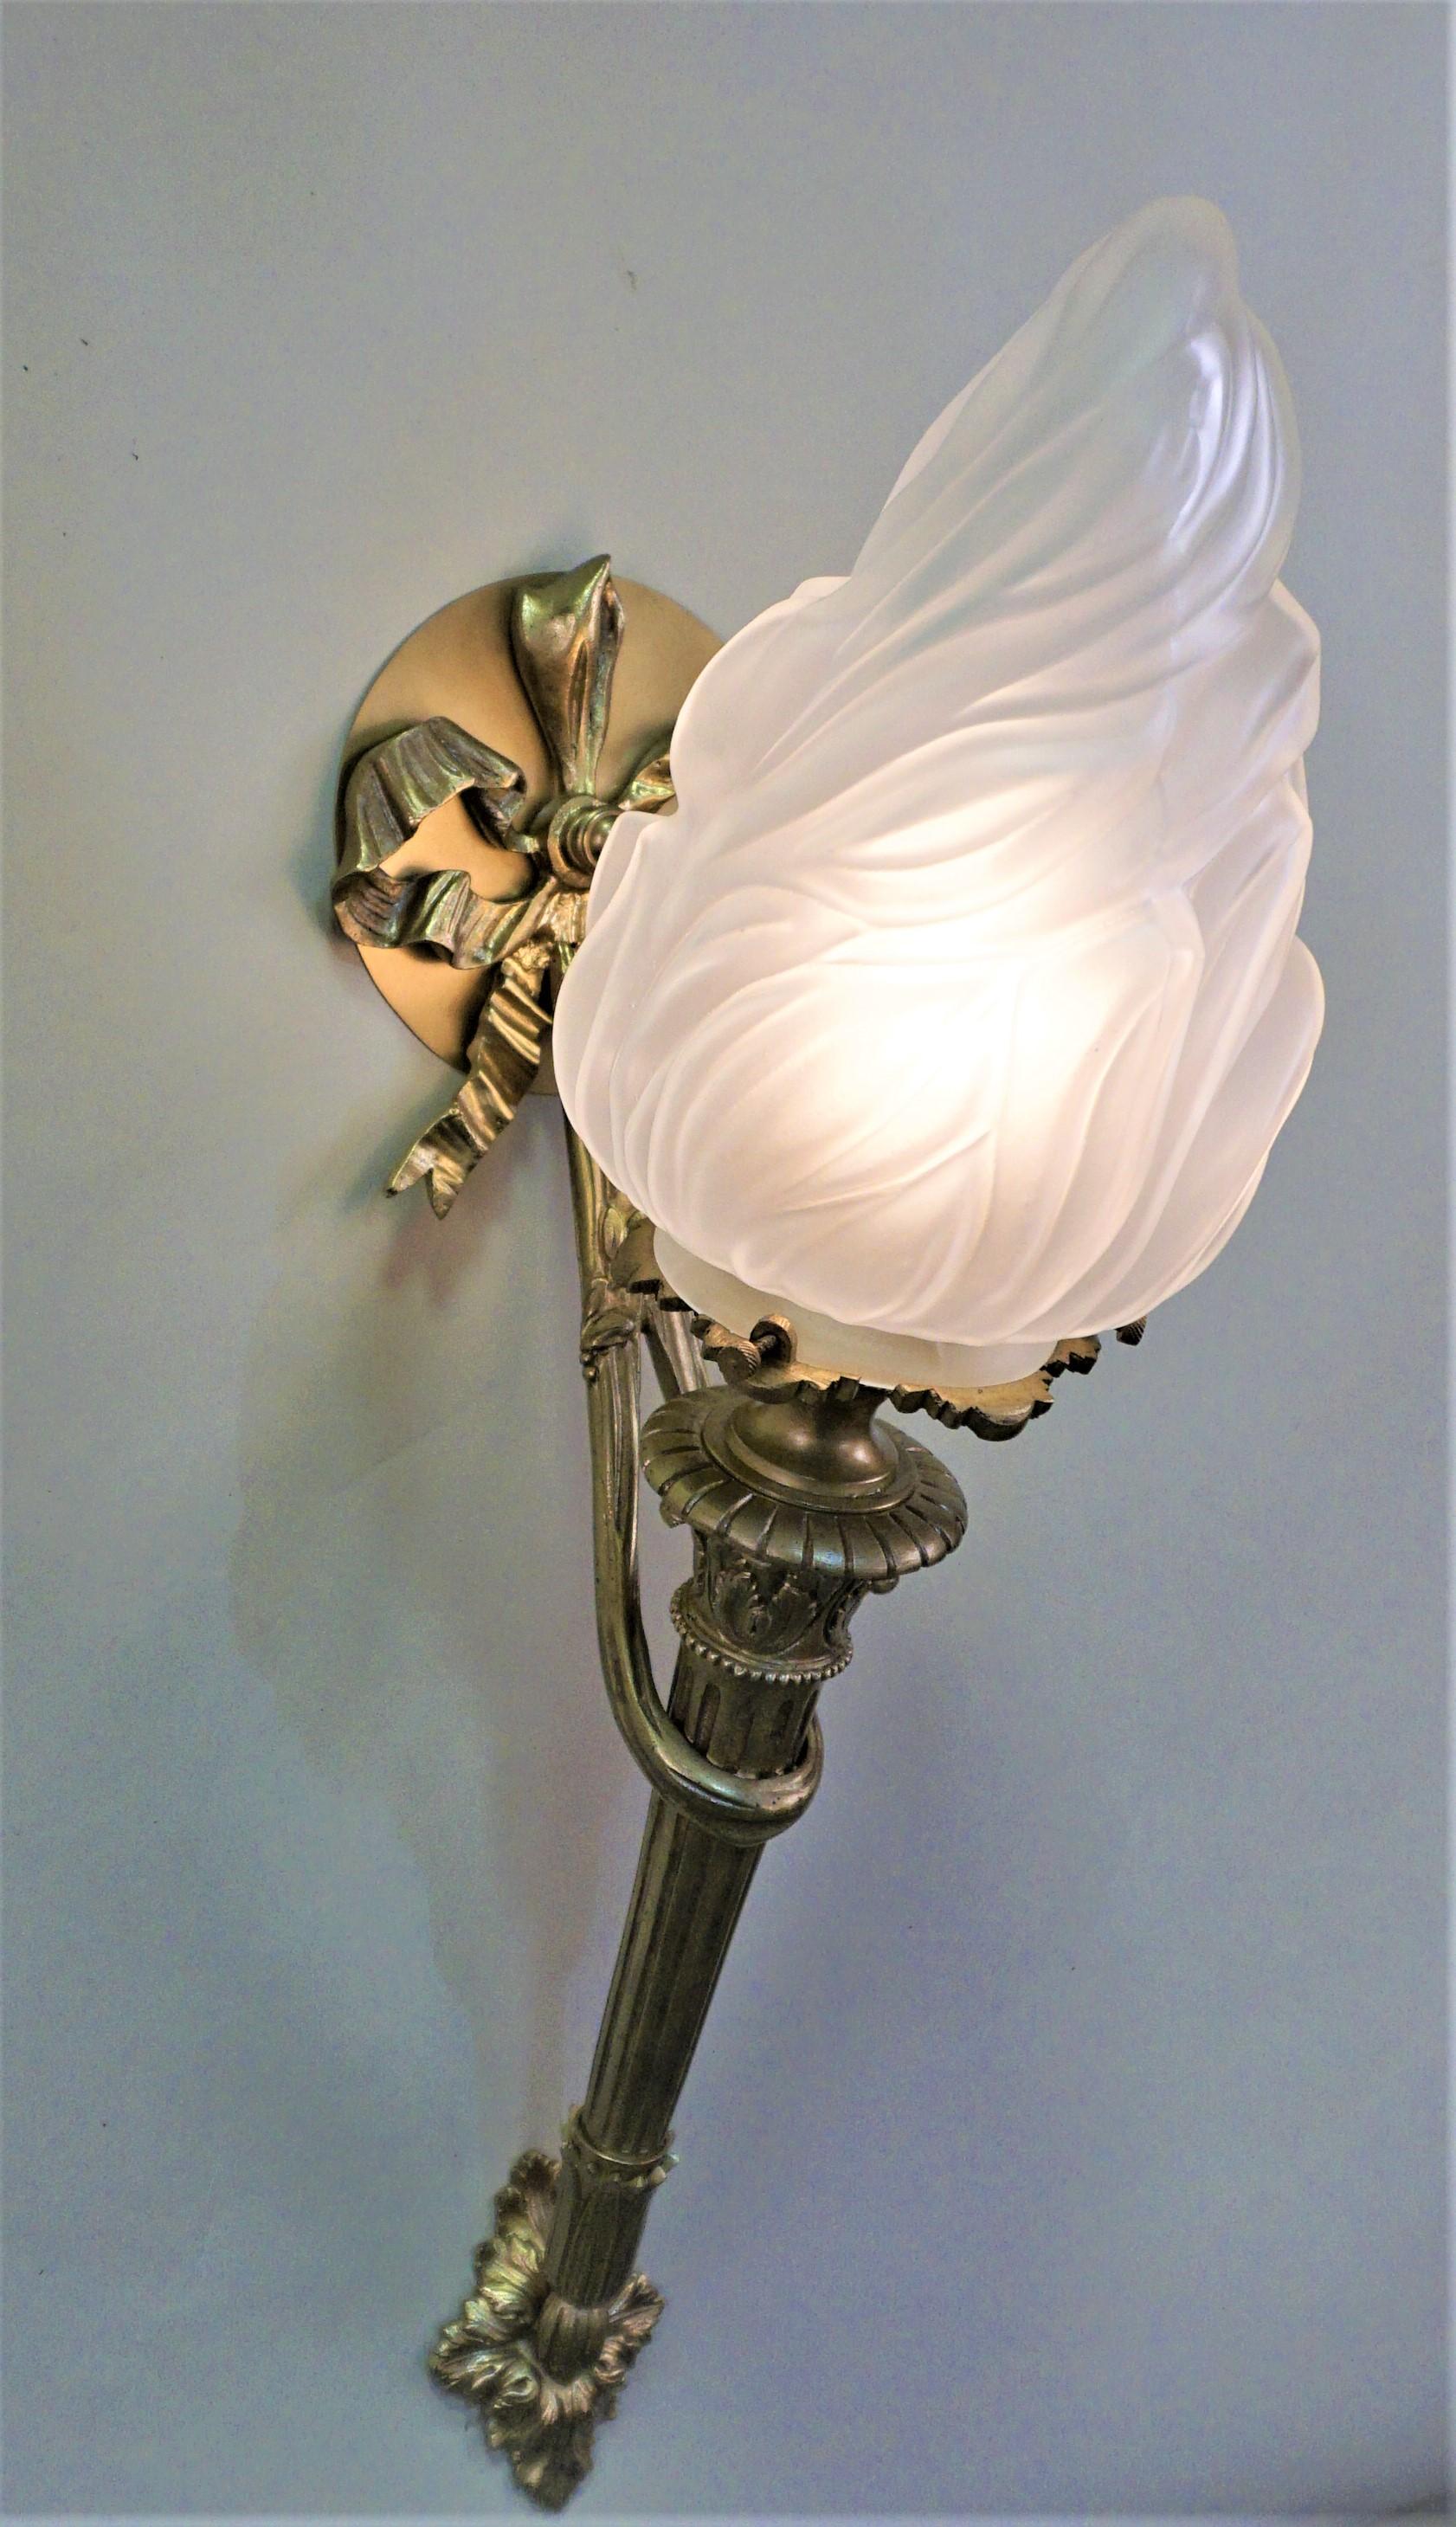 Pair of bronze torchiere wall sconce with flame shape glass shades.